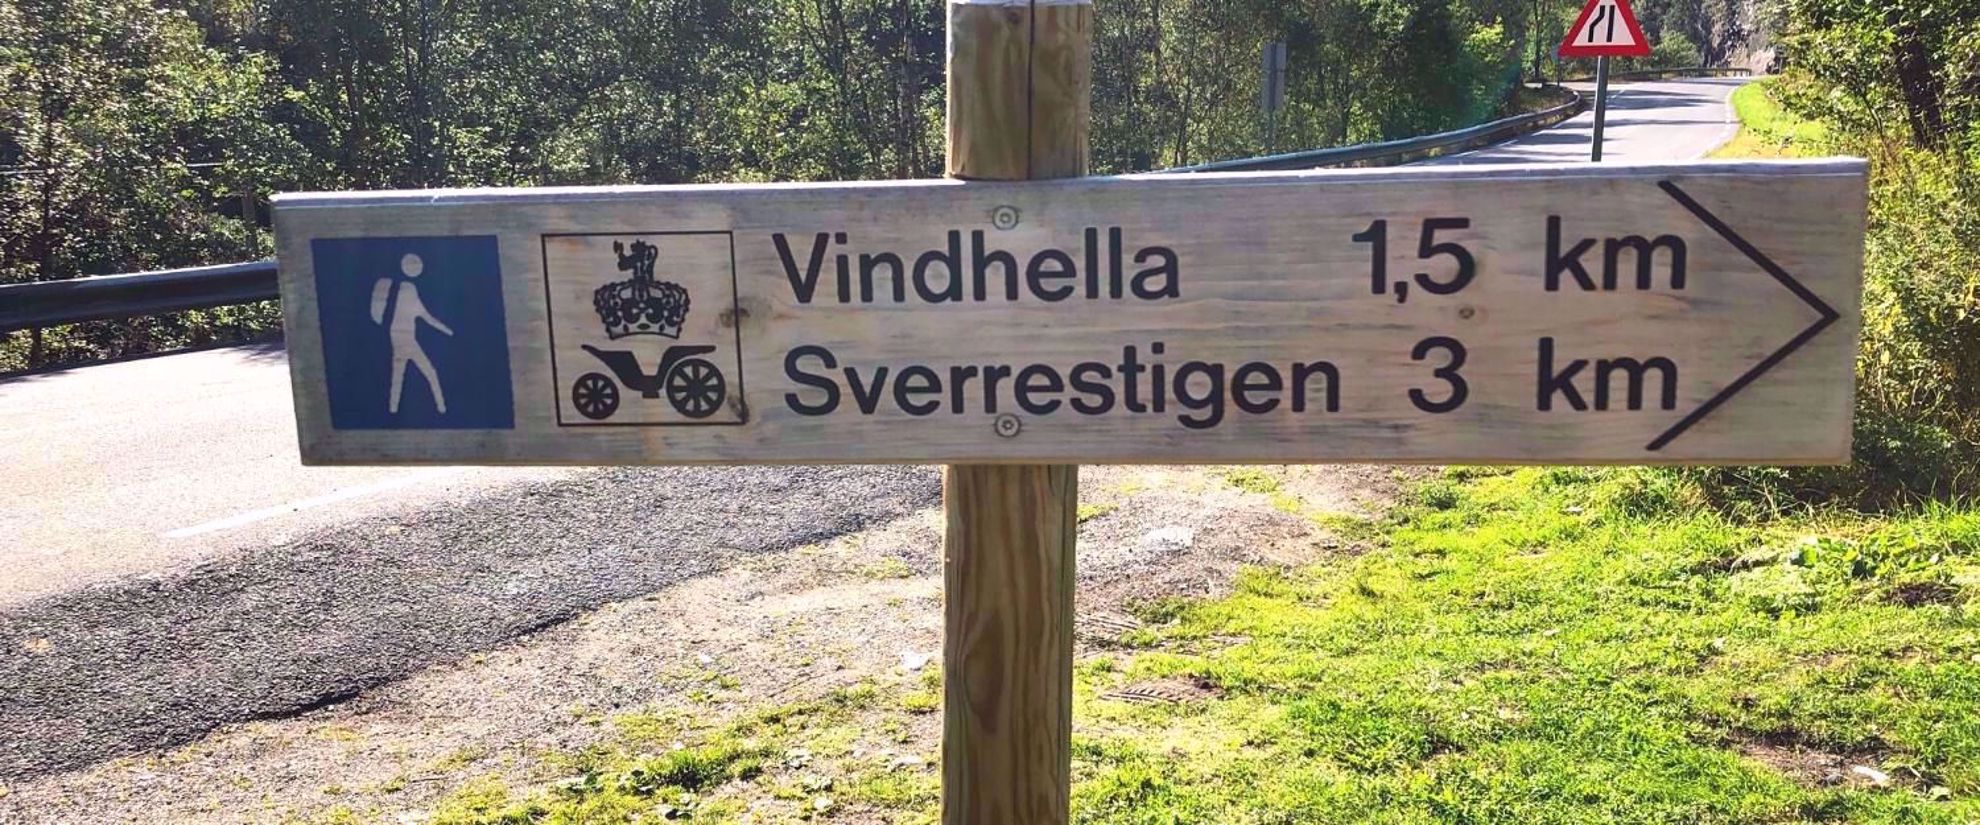 trail signs in norway